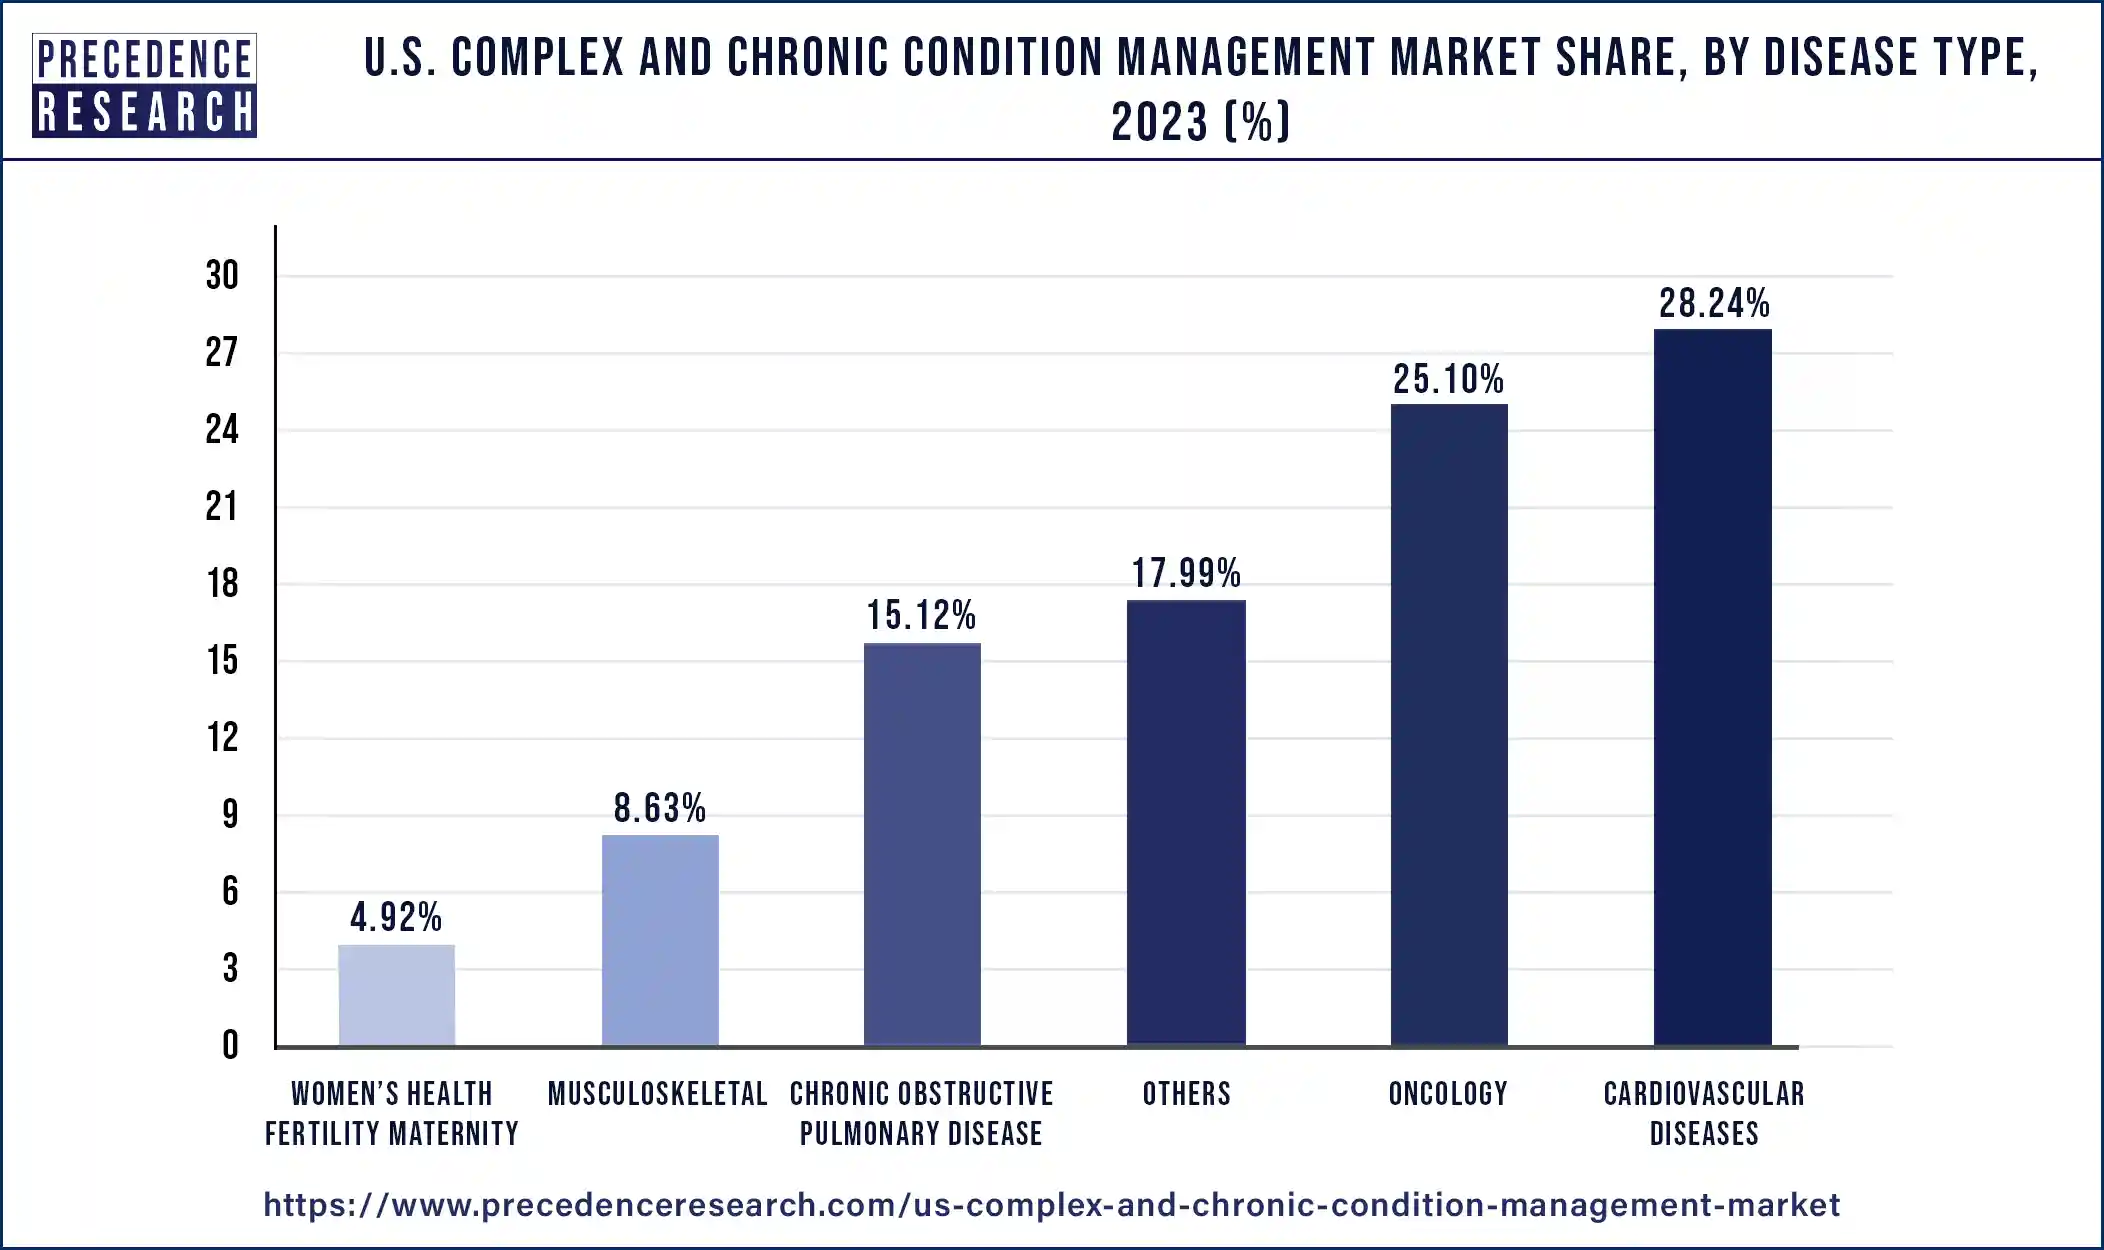 U.S. Complex and Chronic Condition Management Market Share, By Disease Type, 2023 (%)